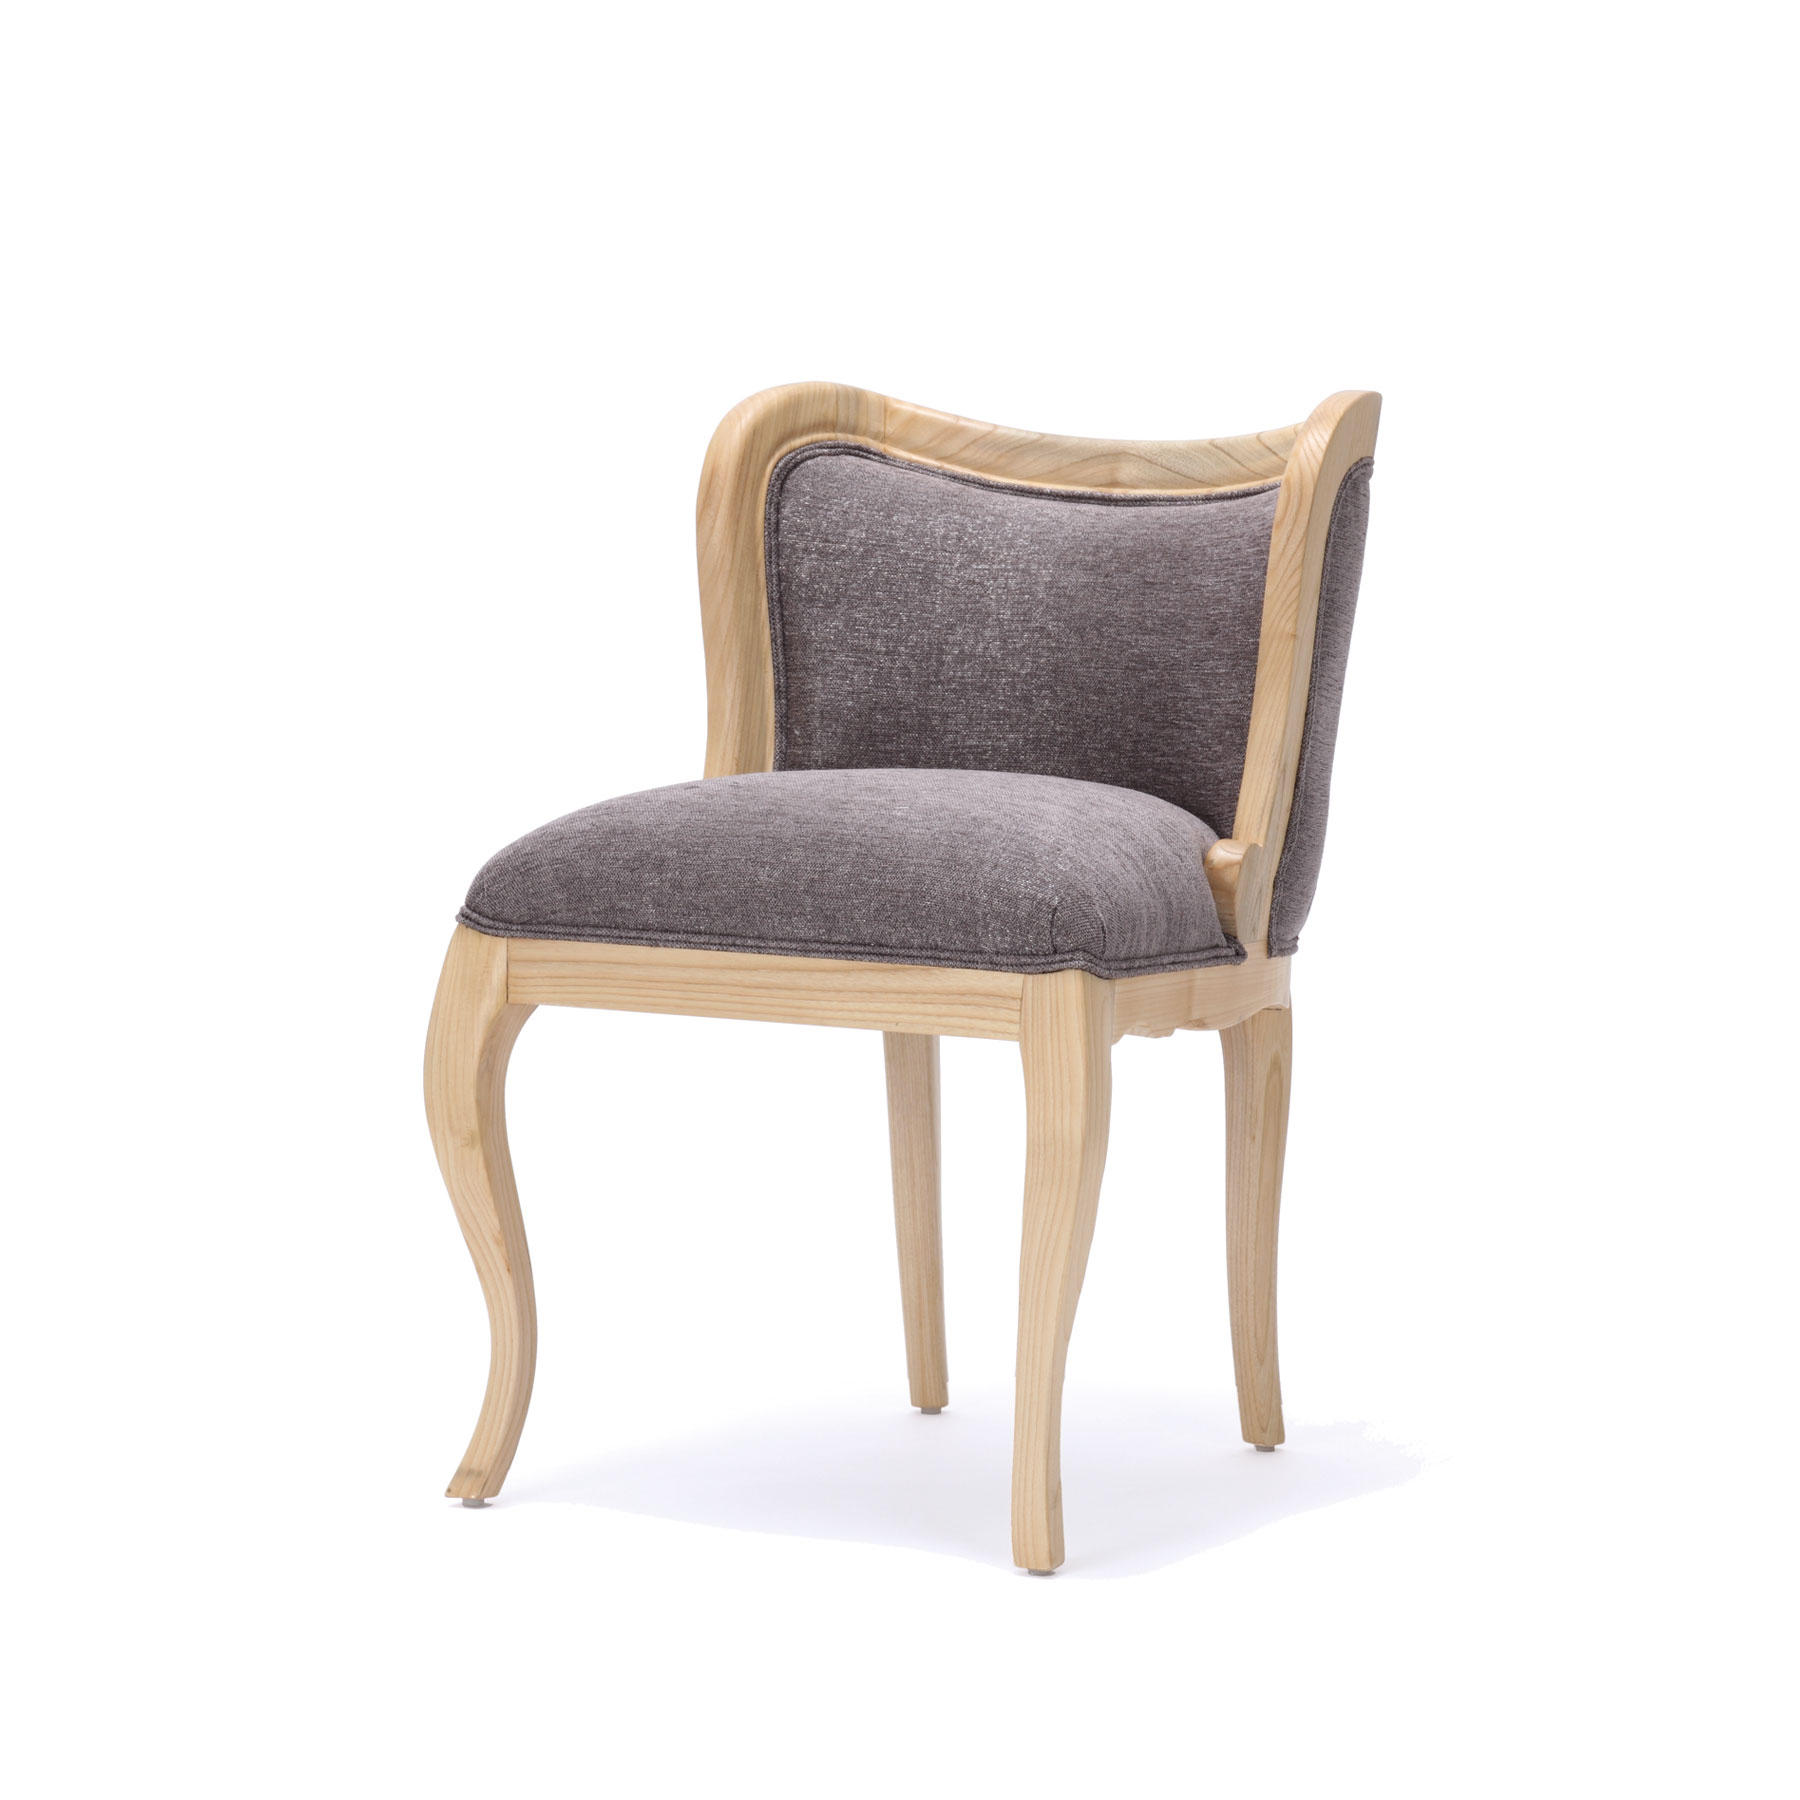 BELL SIDE CHAIR | 【ASPLUND CONTRACT】 アスプルンド コントラクト